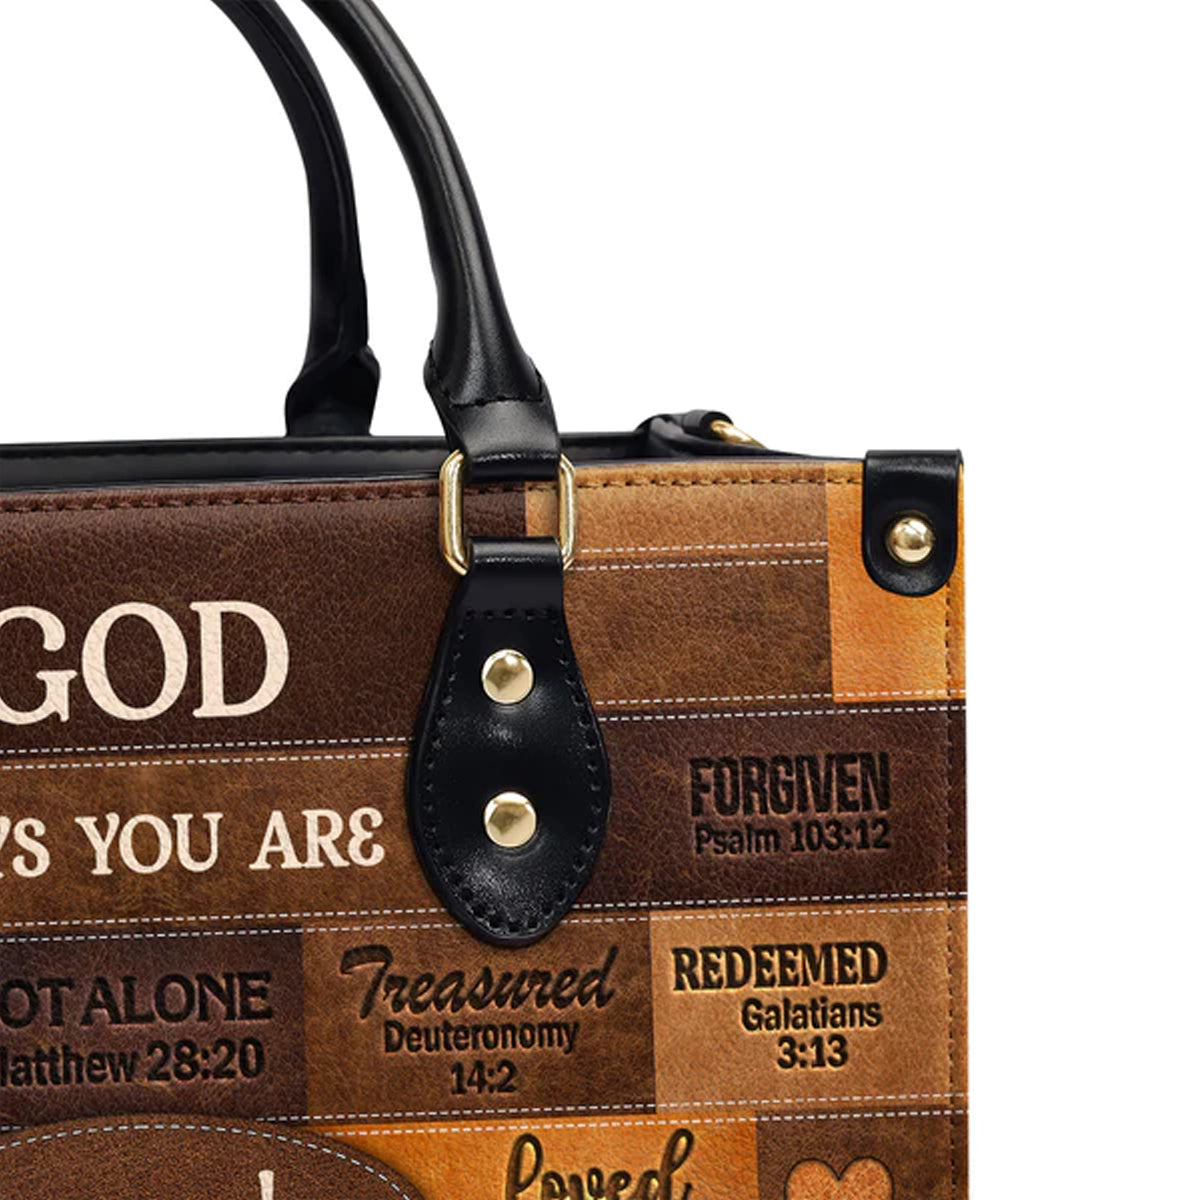 Christianartbag Handbags, God Says You Are Leather Bags, Personalized Bags, Gifts for Women, Christmas Gift, CABLTB01040823. - Christian Art Bag